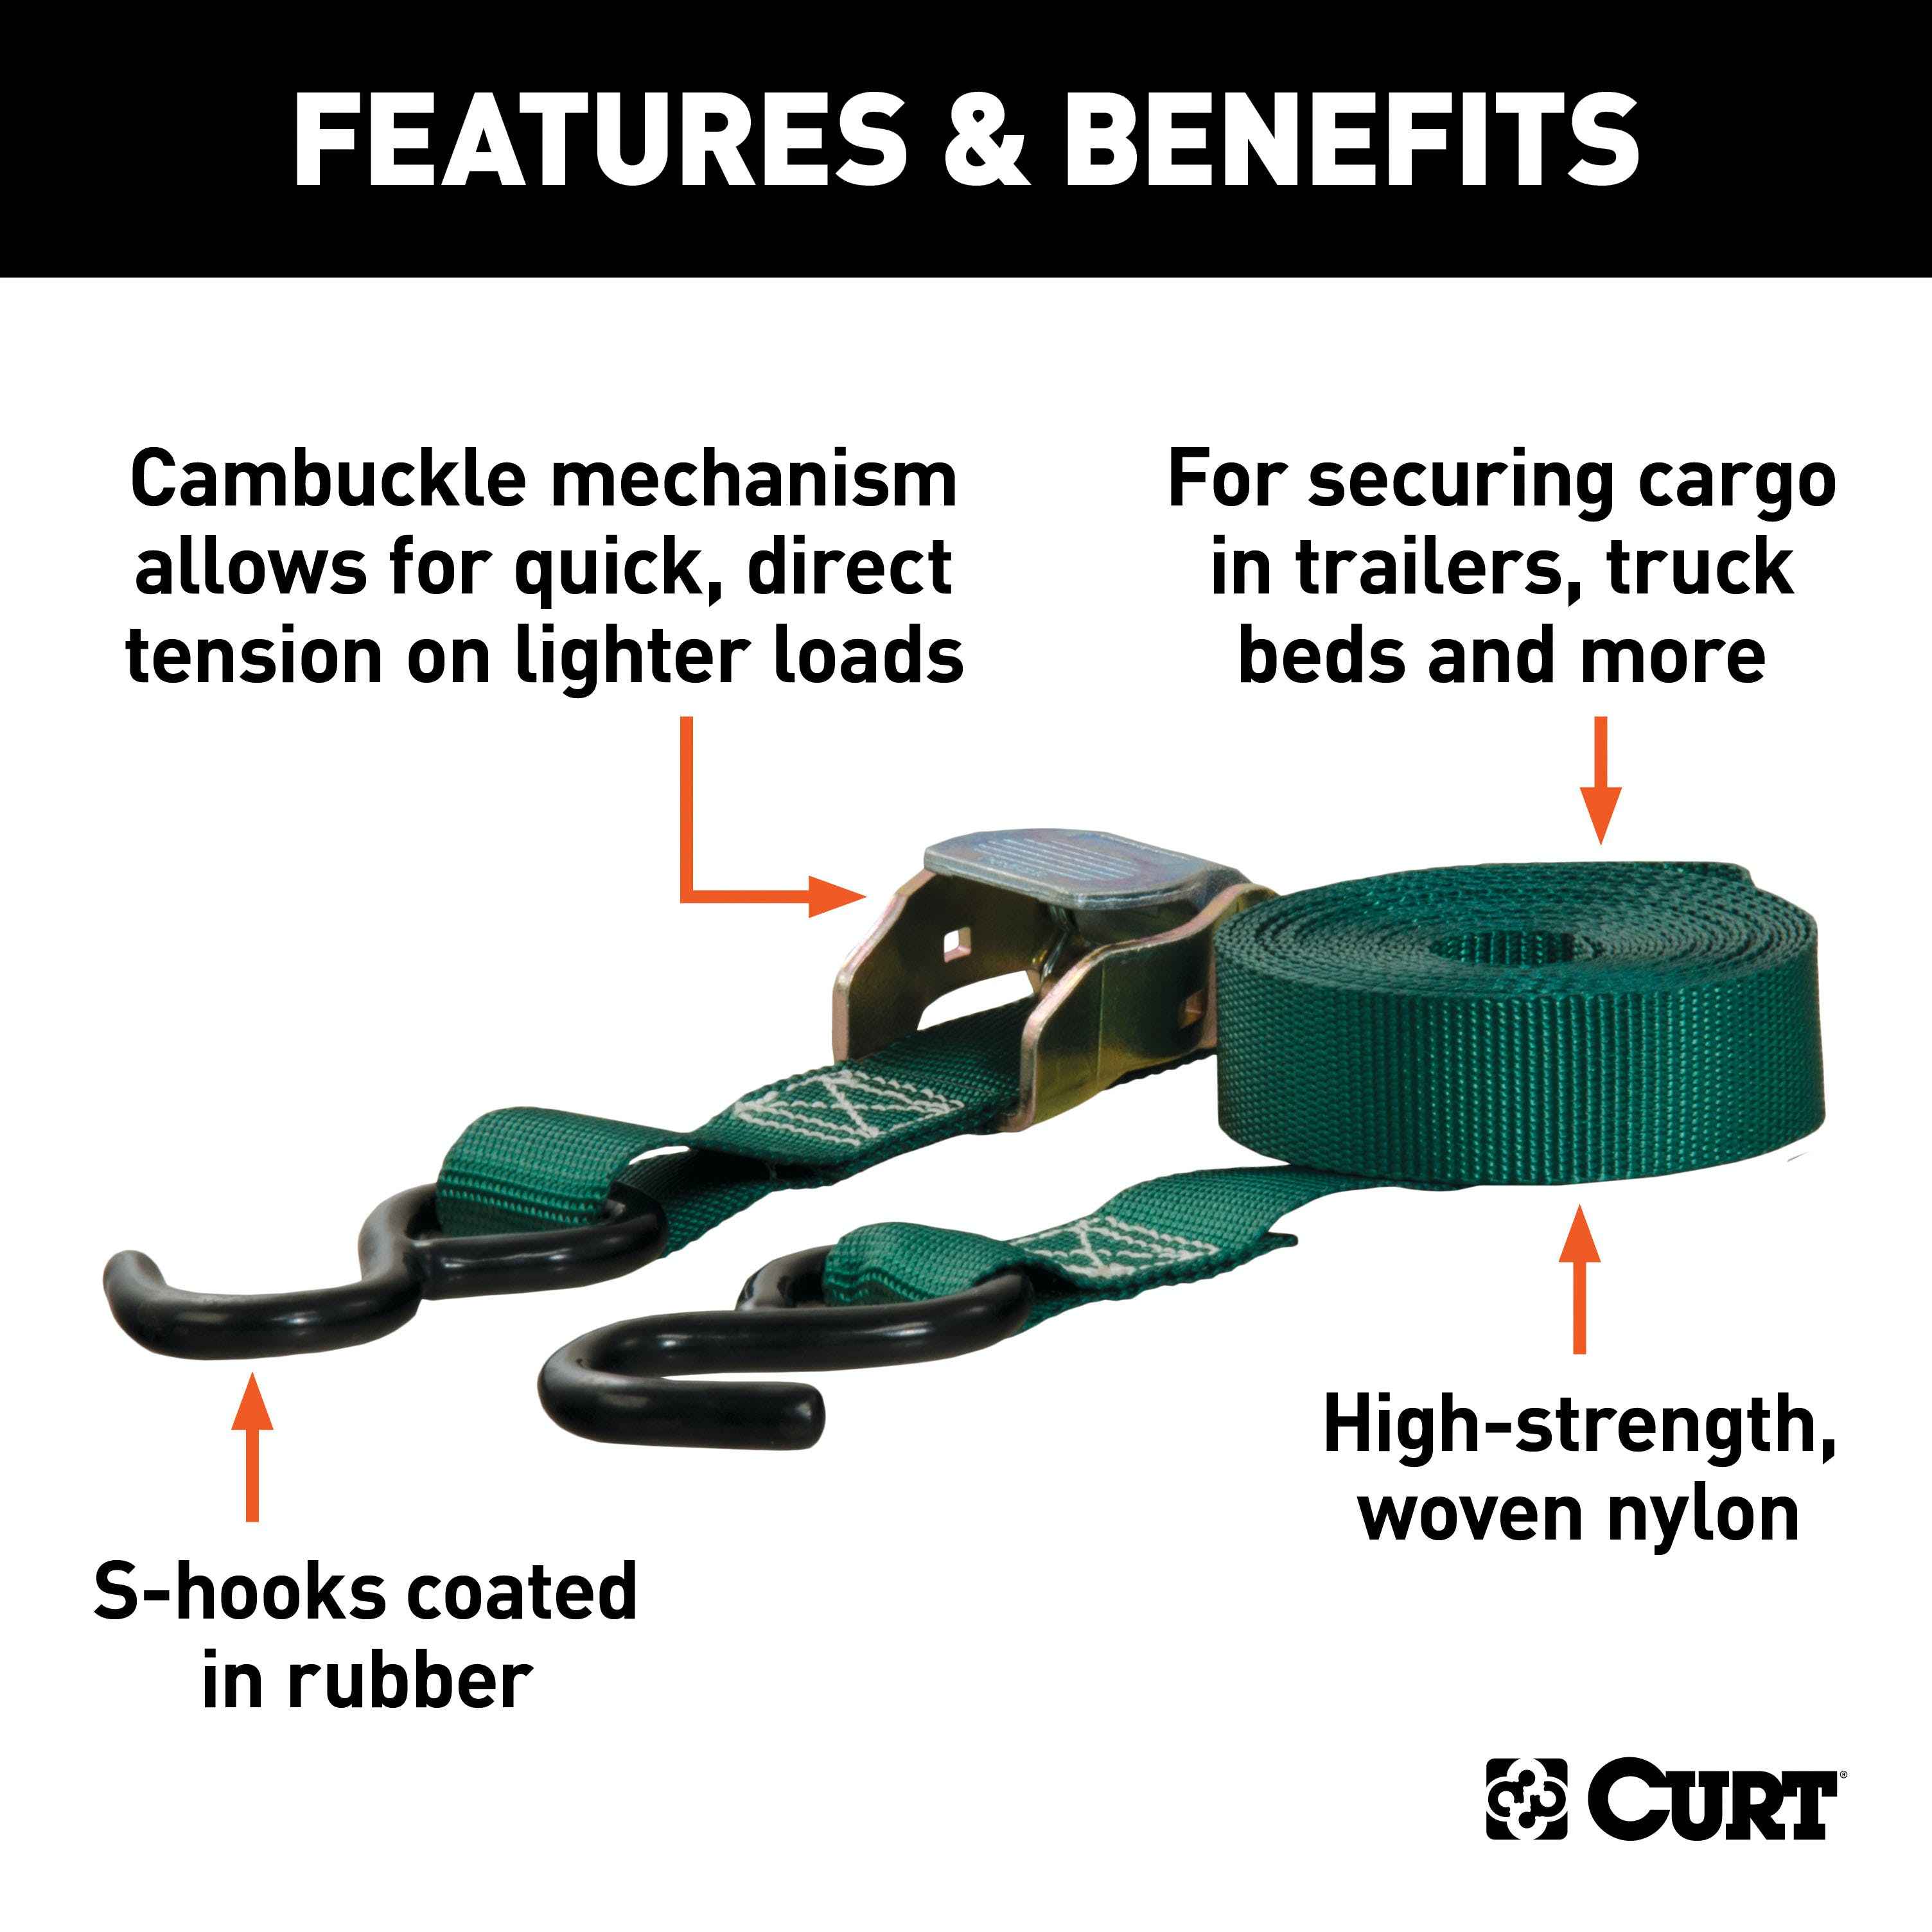 CURT 83015 15' Dark Green Cargo Straps with S-Hooks (300 lbs, 2-Pack)